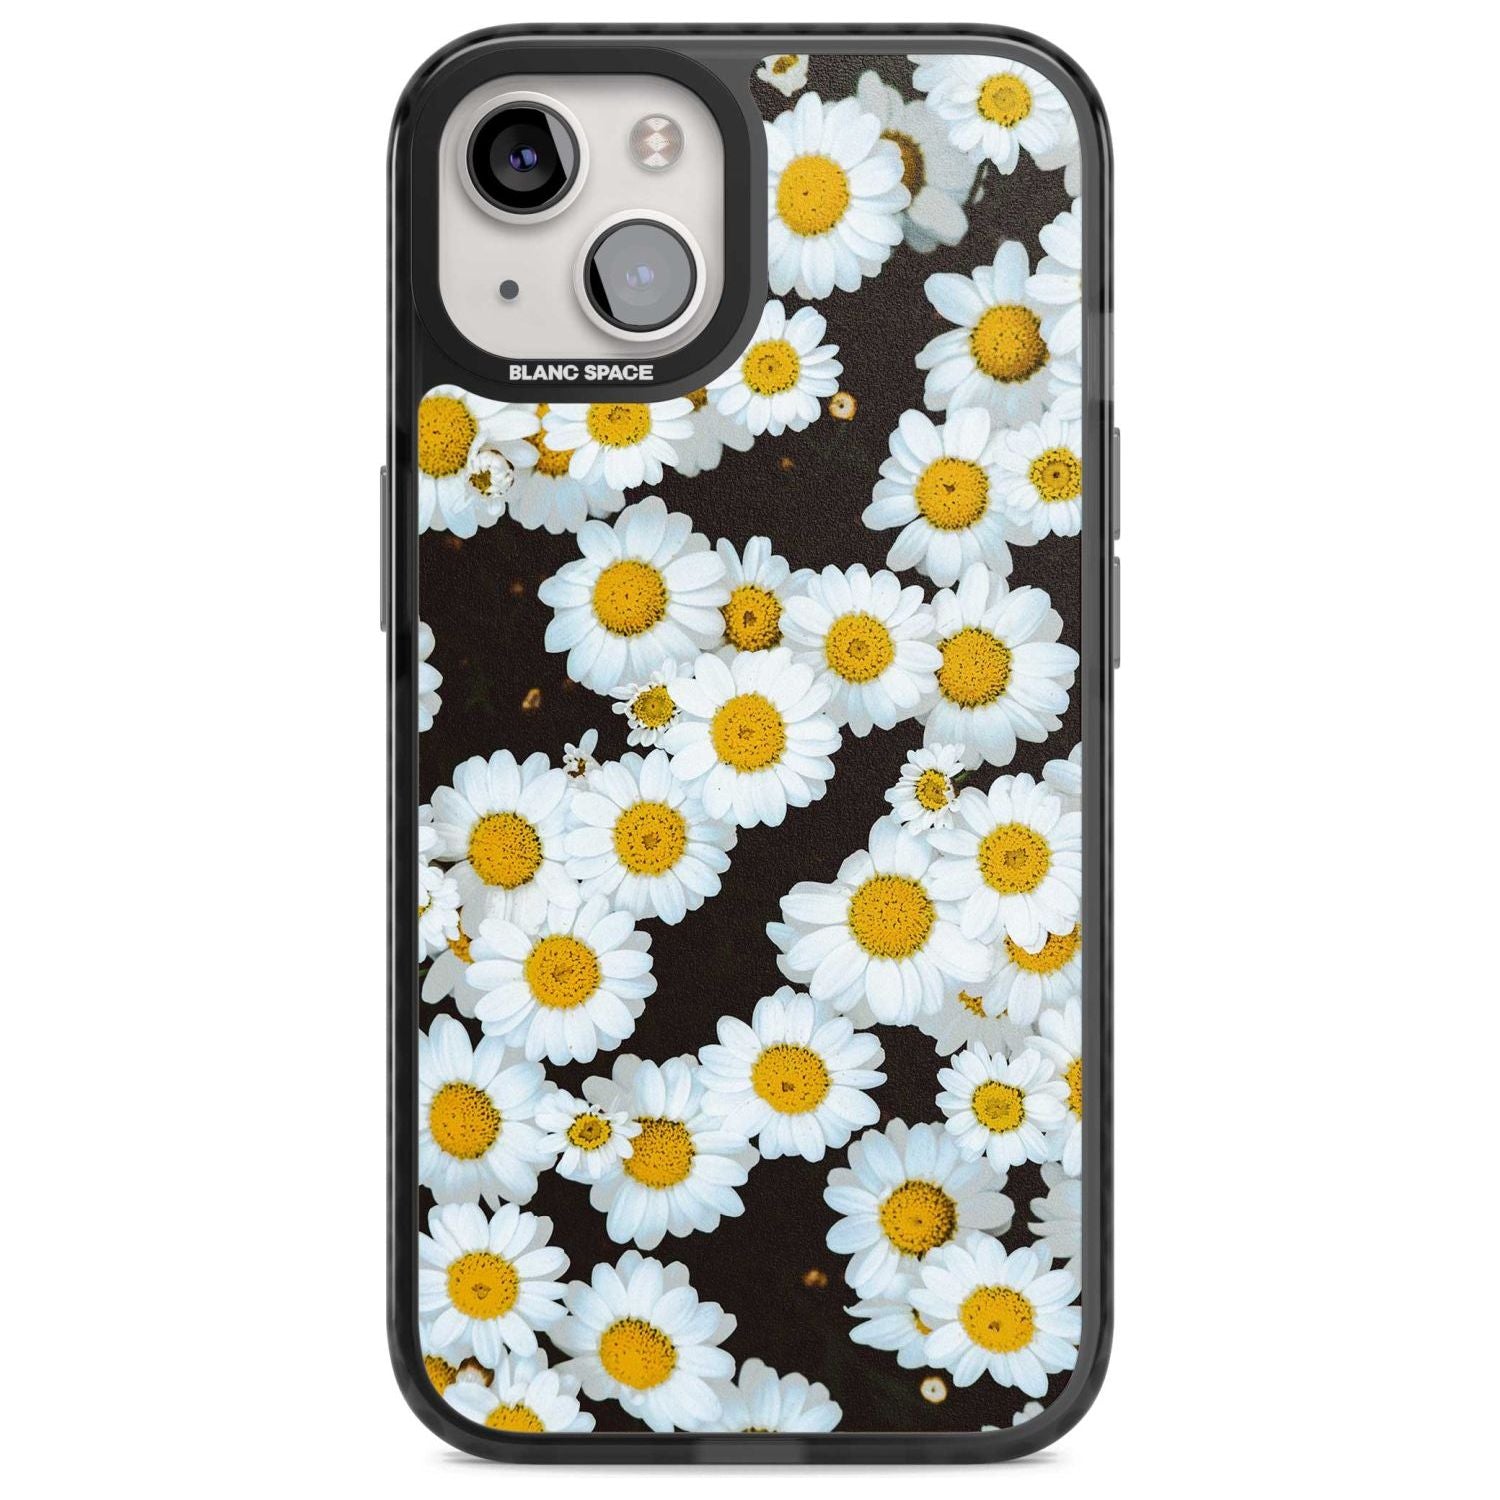 Daisies - Real Floral Photographs Phone Case iPhone 15 Plus / Magsafe Black Impact Case,iPhone 15 / Magsafe Black Impact Case,iPhone 14 Plus / Magsafe Black Impact Case,iPhone 14 / Magsafe Black Impact Case,iPhone 13 / Magsafe Black Impact Case Blanc Space